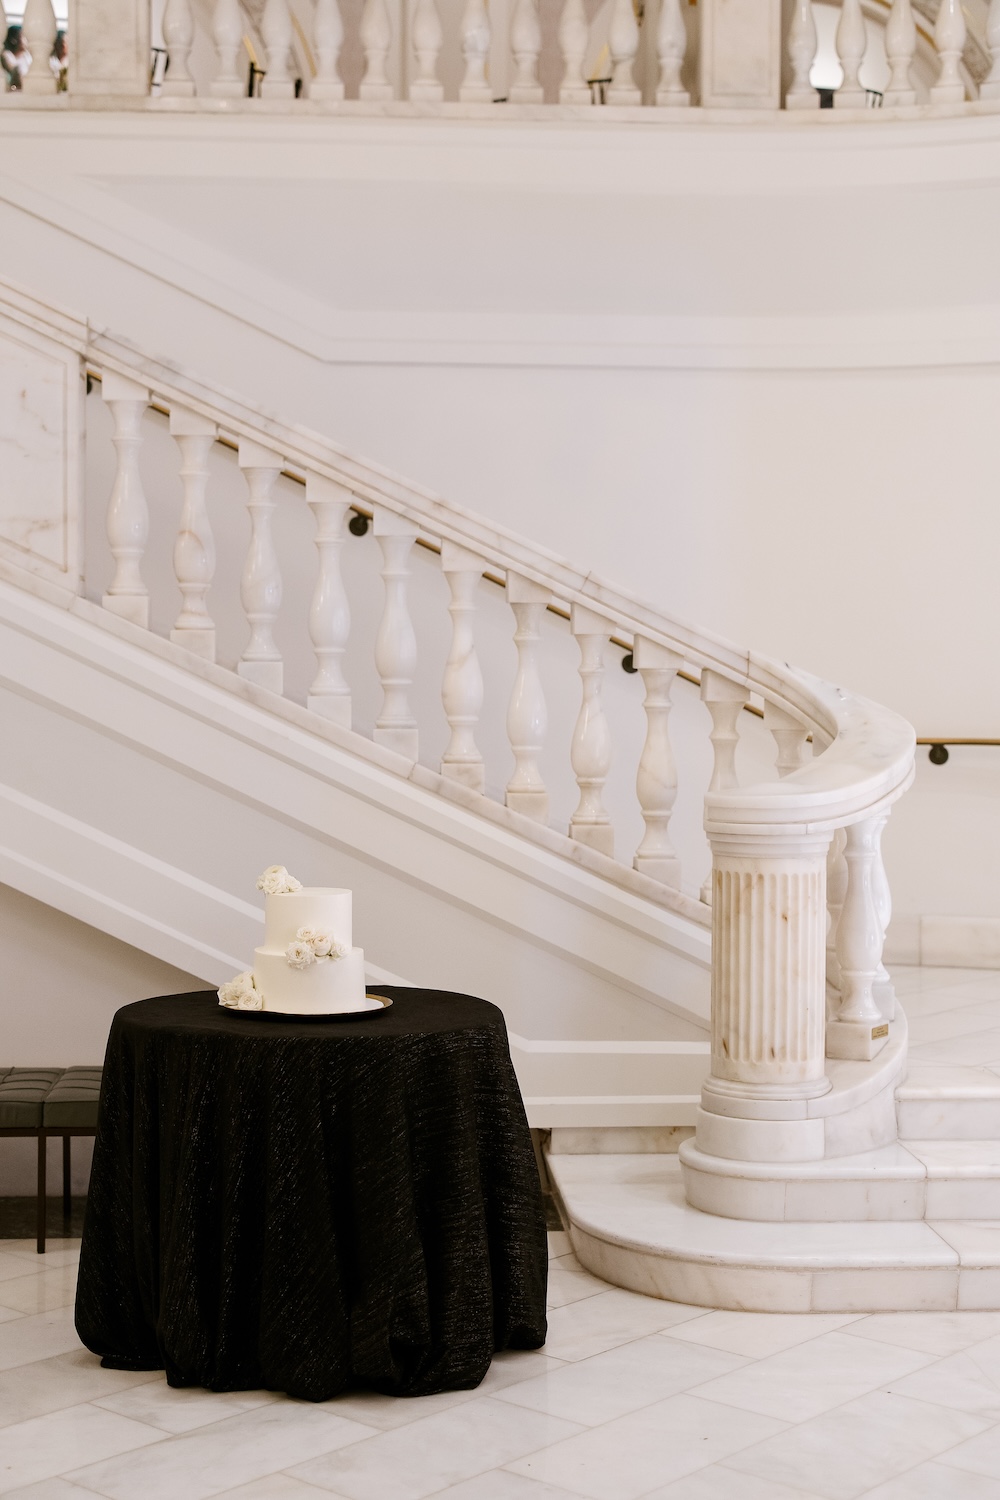 Simple modern wedding cake, two tiers, flowers on cake. Modern Washington DC wedding at National Museum of Women in the Arts. Sarah Bradshaw Photography.